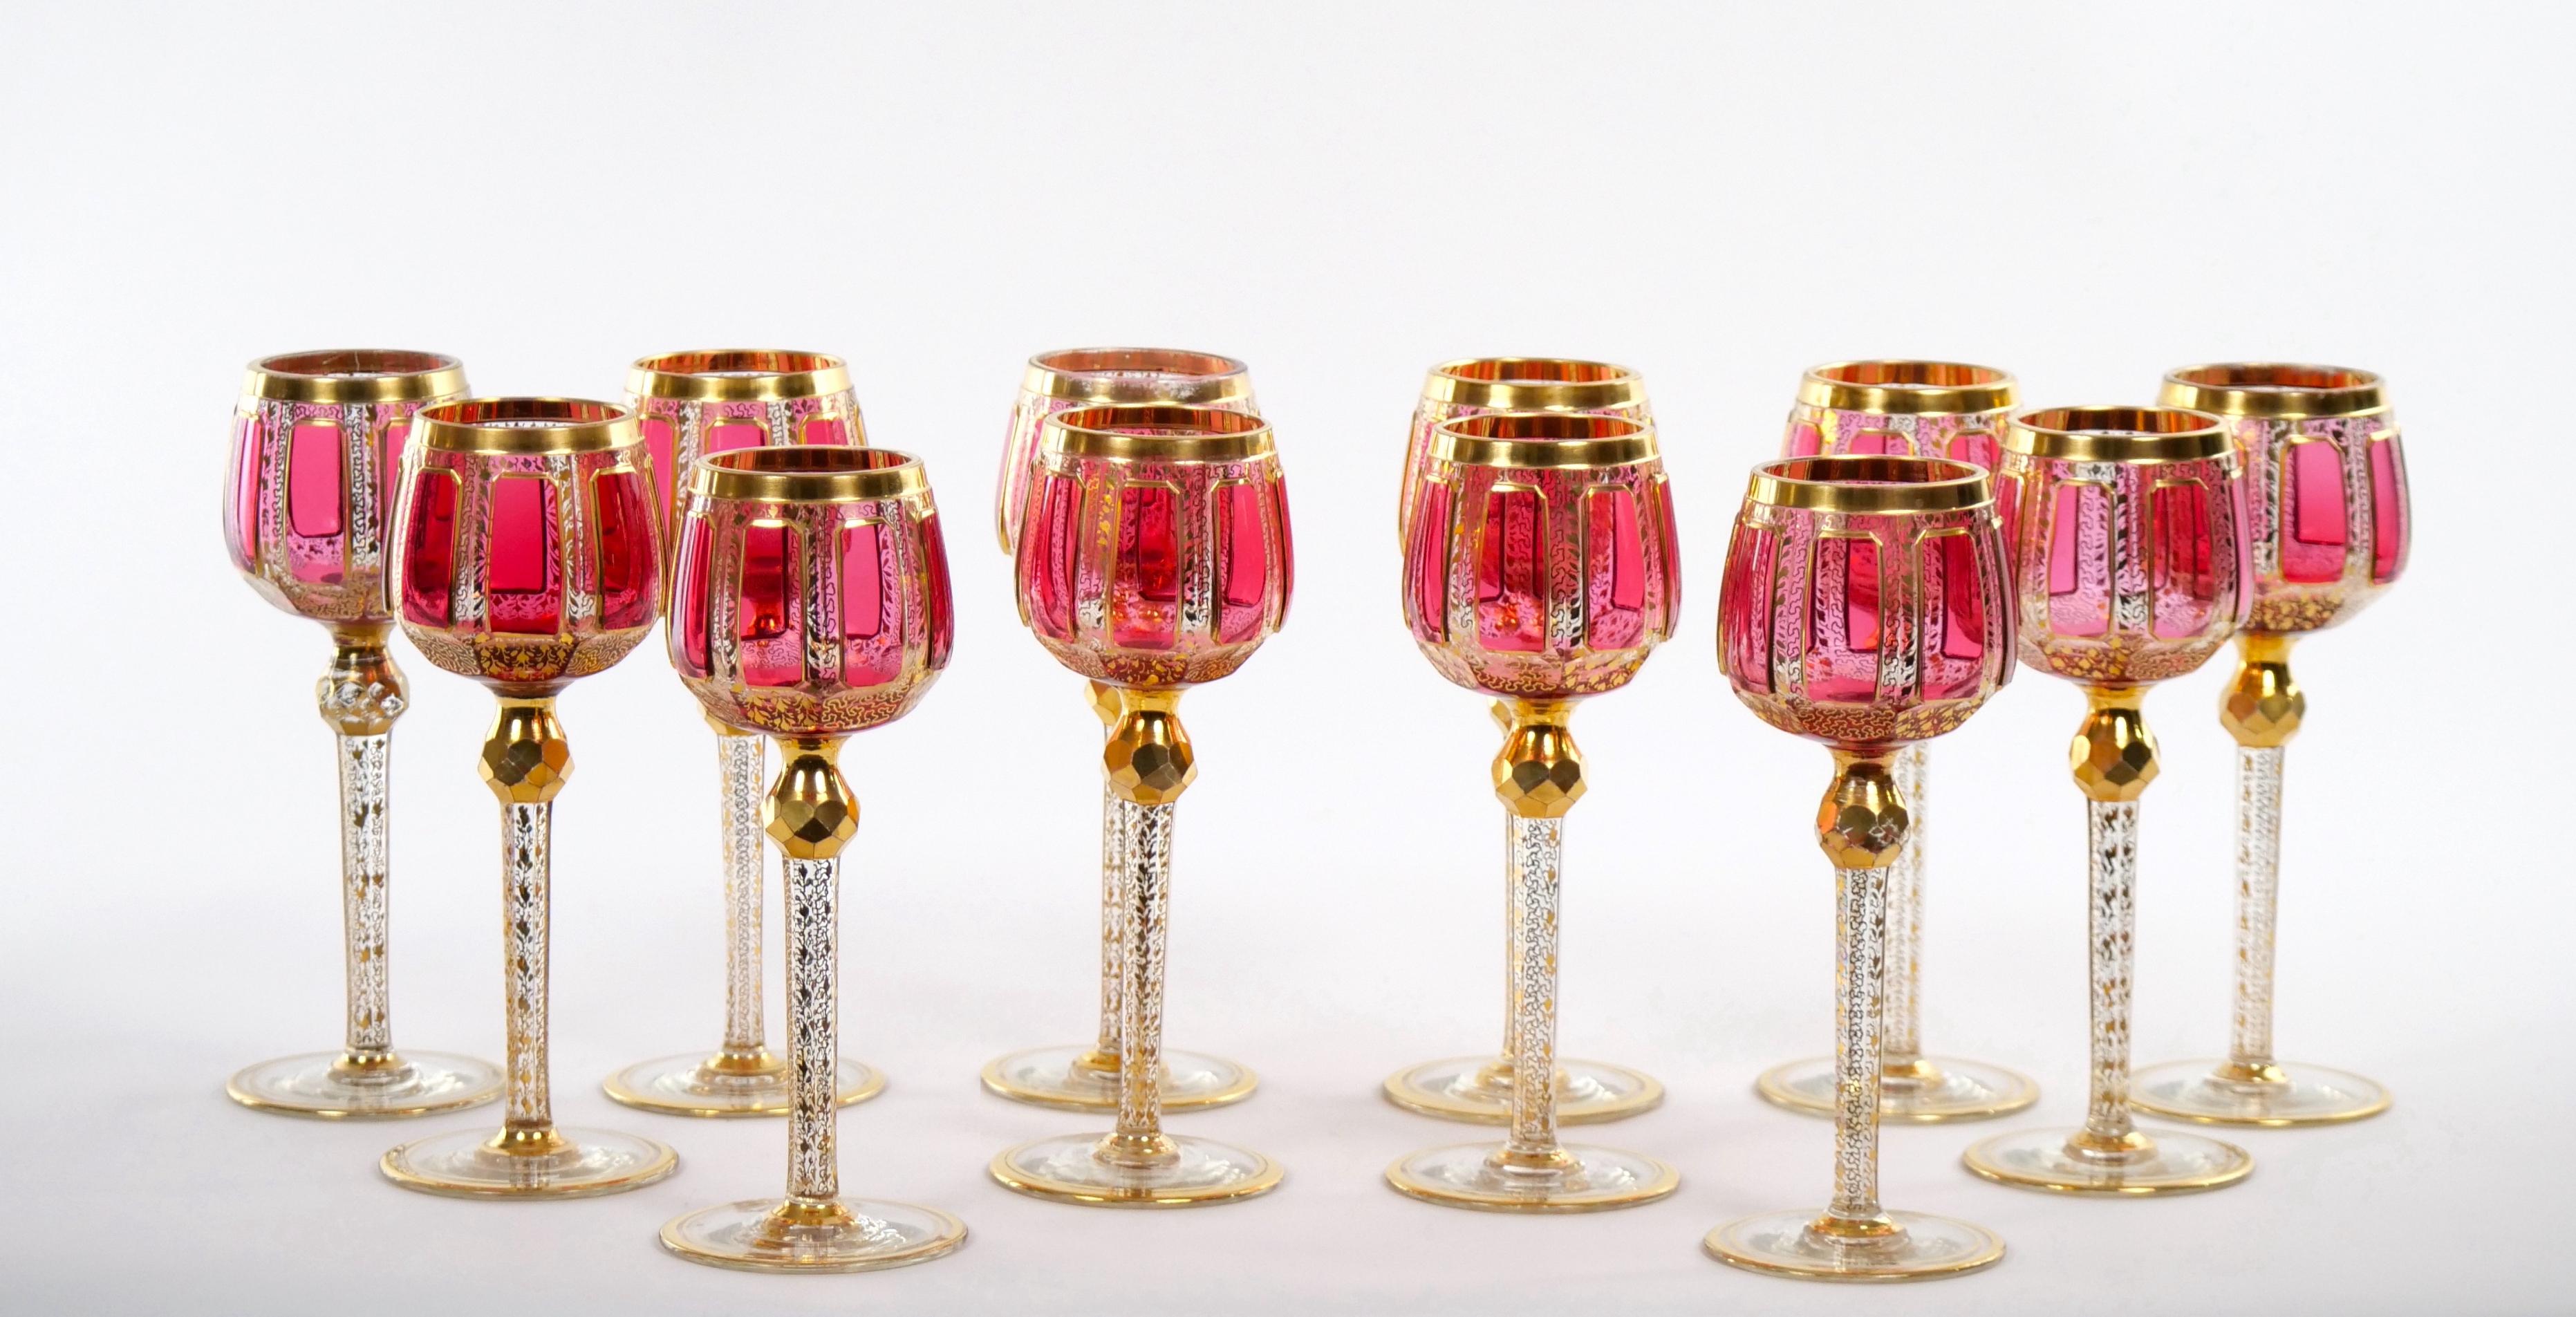 Czech Moser Gilt Gold Enameled Pink Paneled wine Service / 12 People For Sale